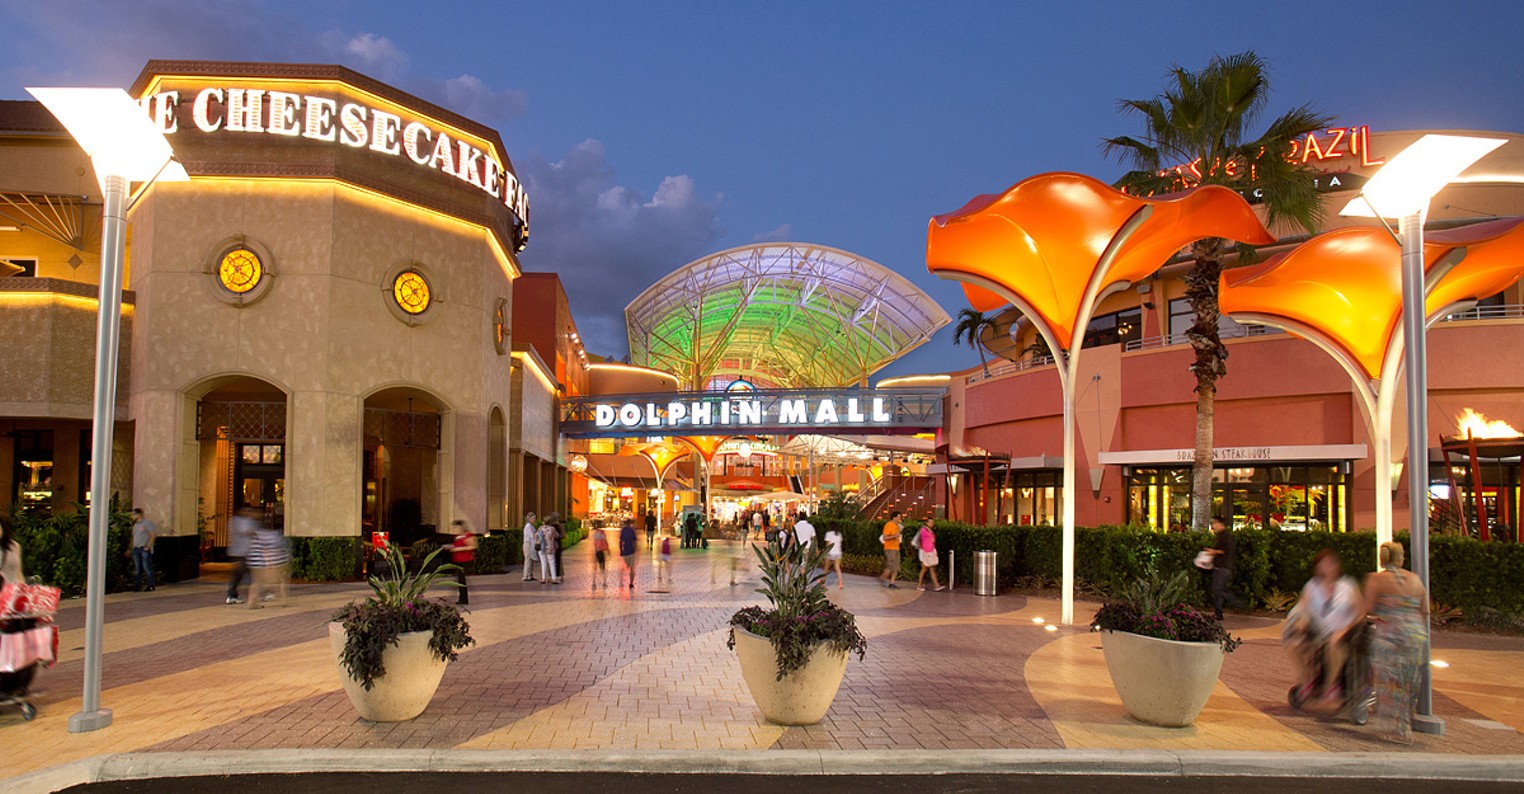 10 Of The Biggest Malls In South Florida - Jetset Times